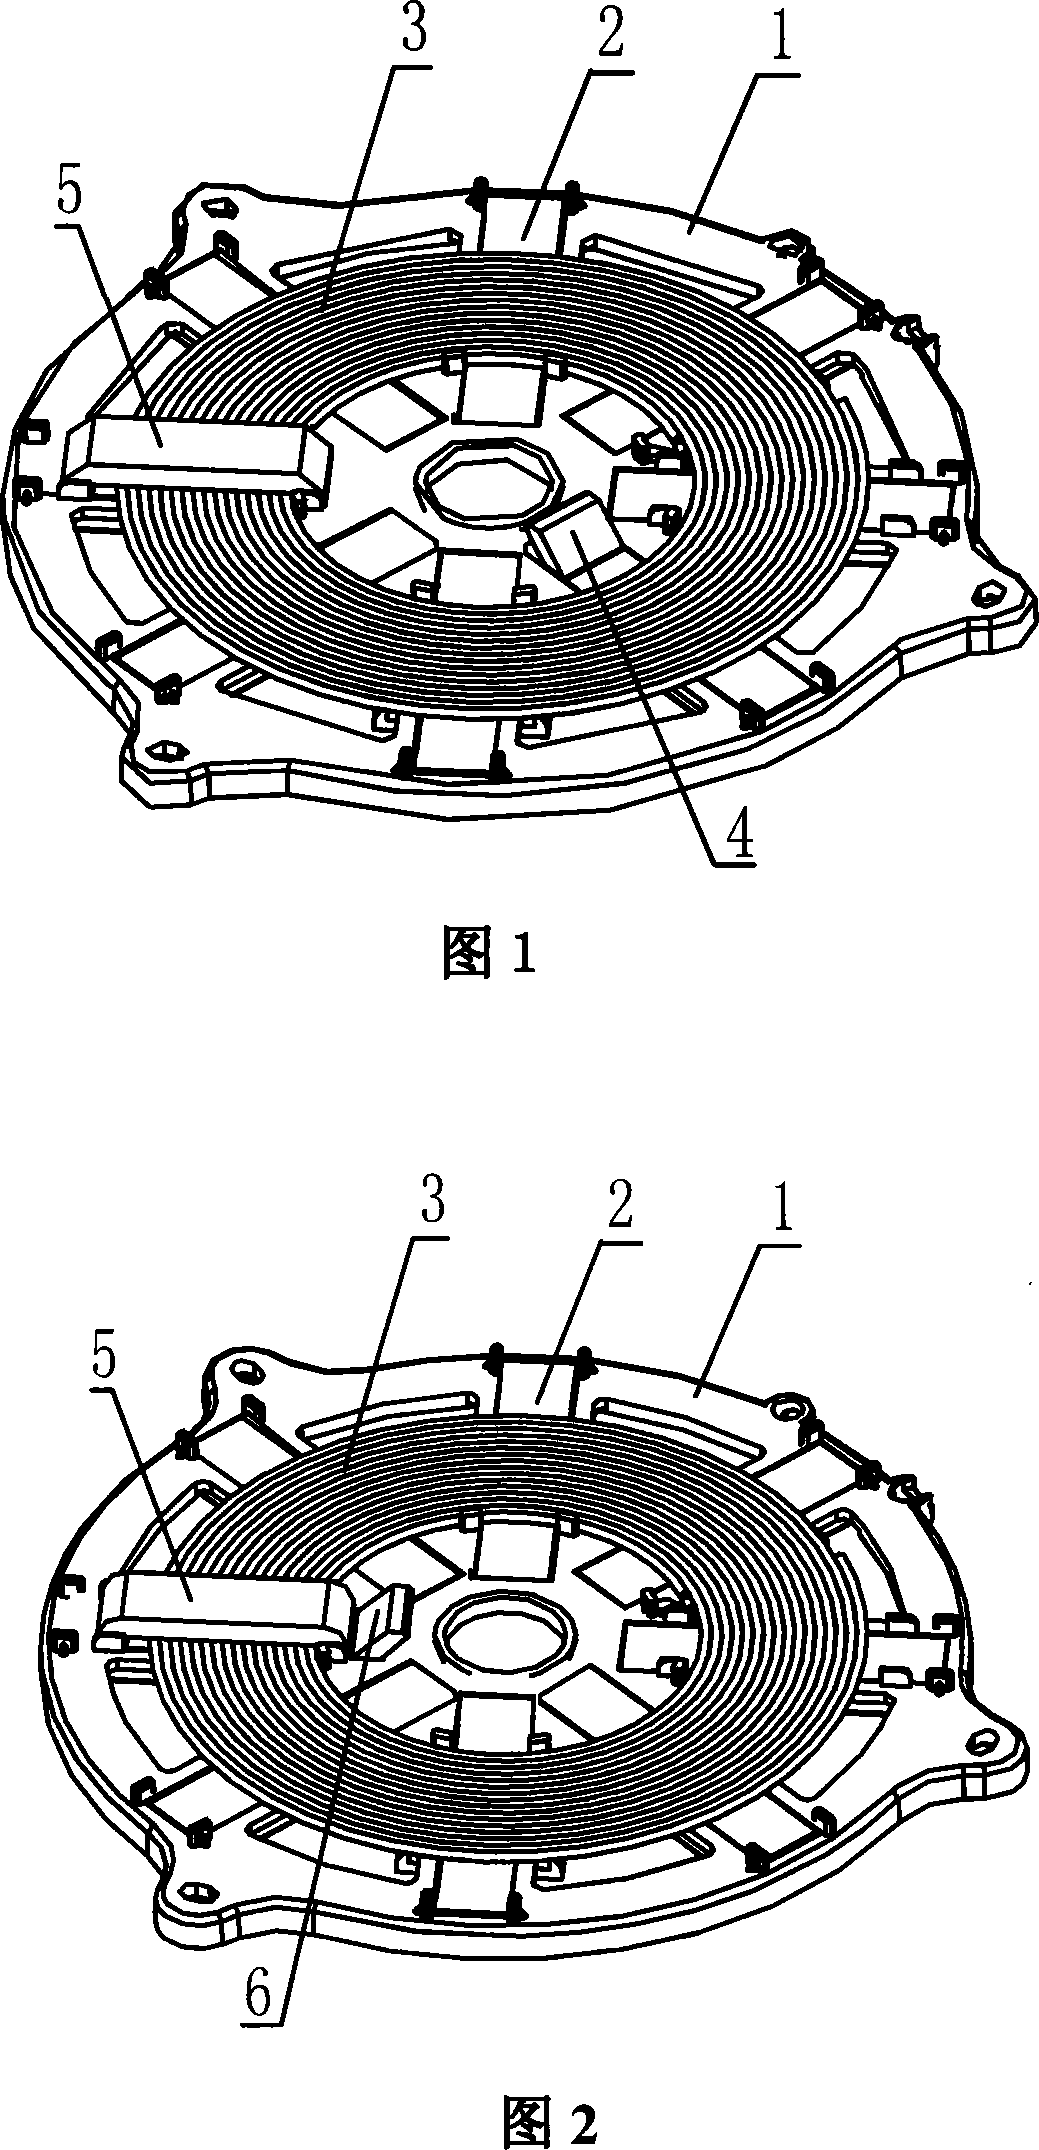 Self-adapting wire coil to power of induction cooker